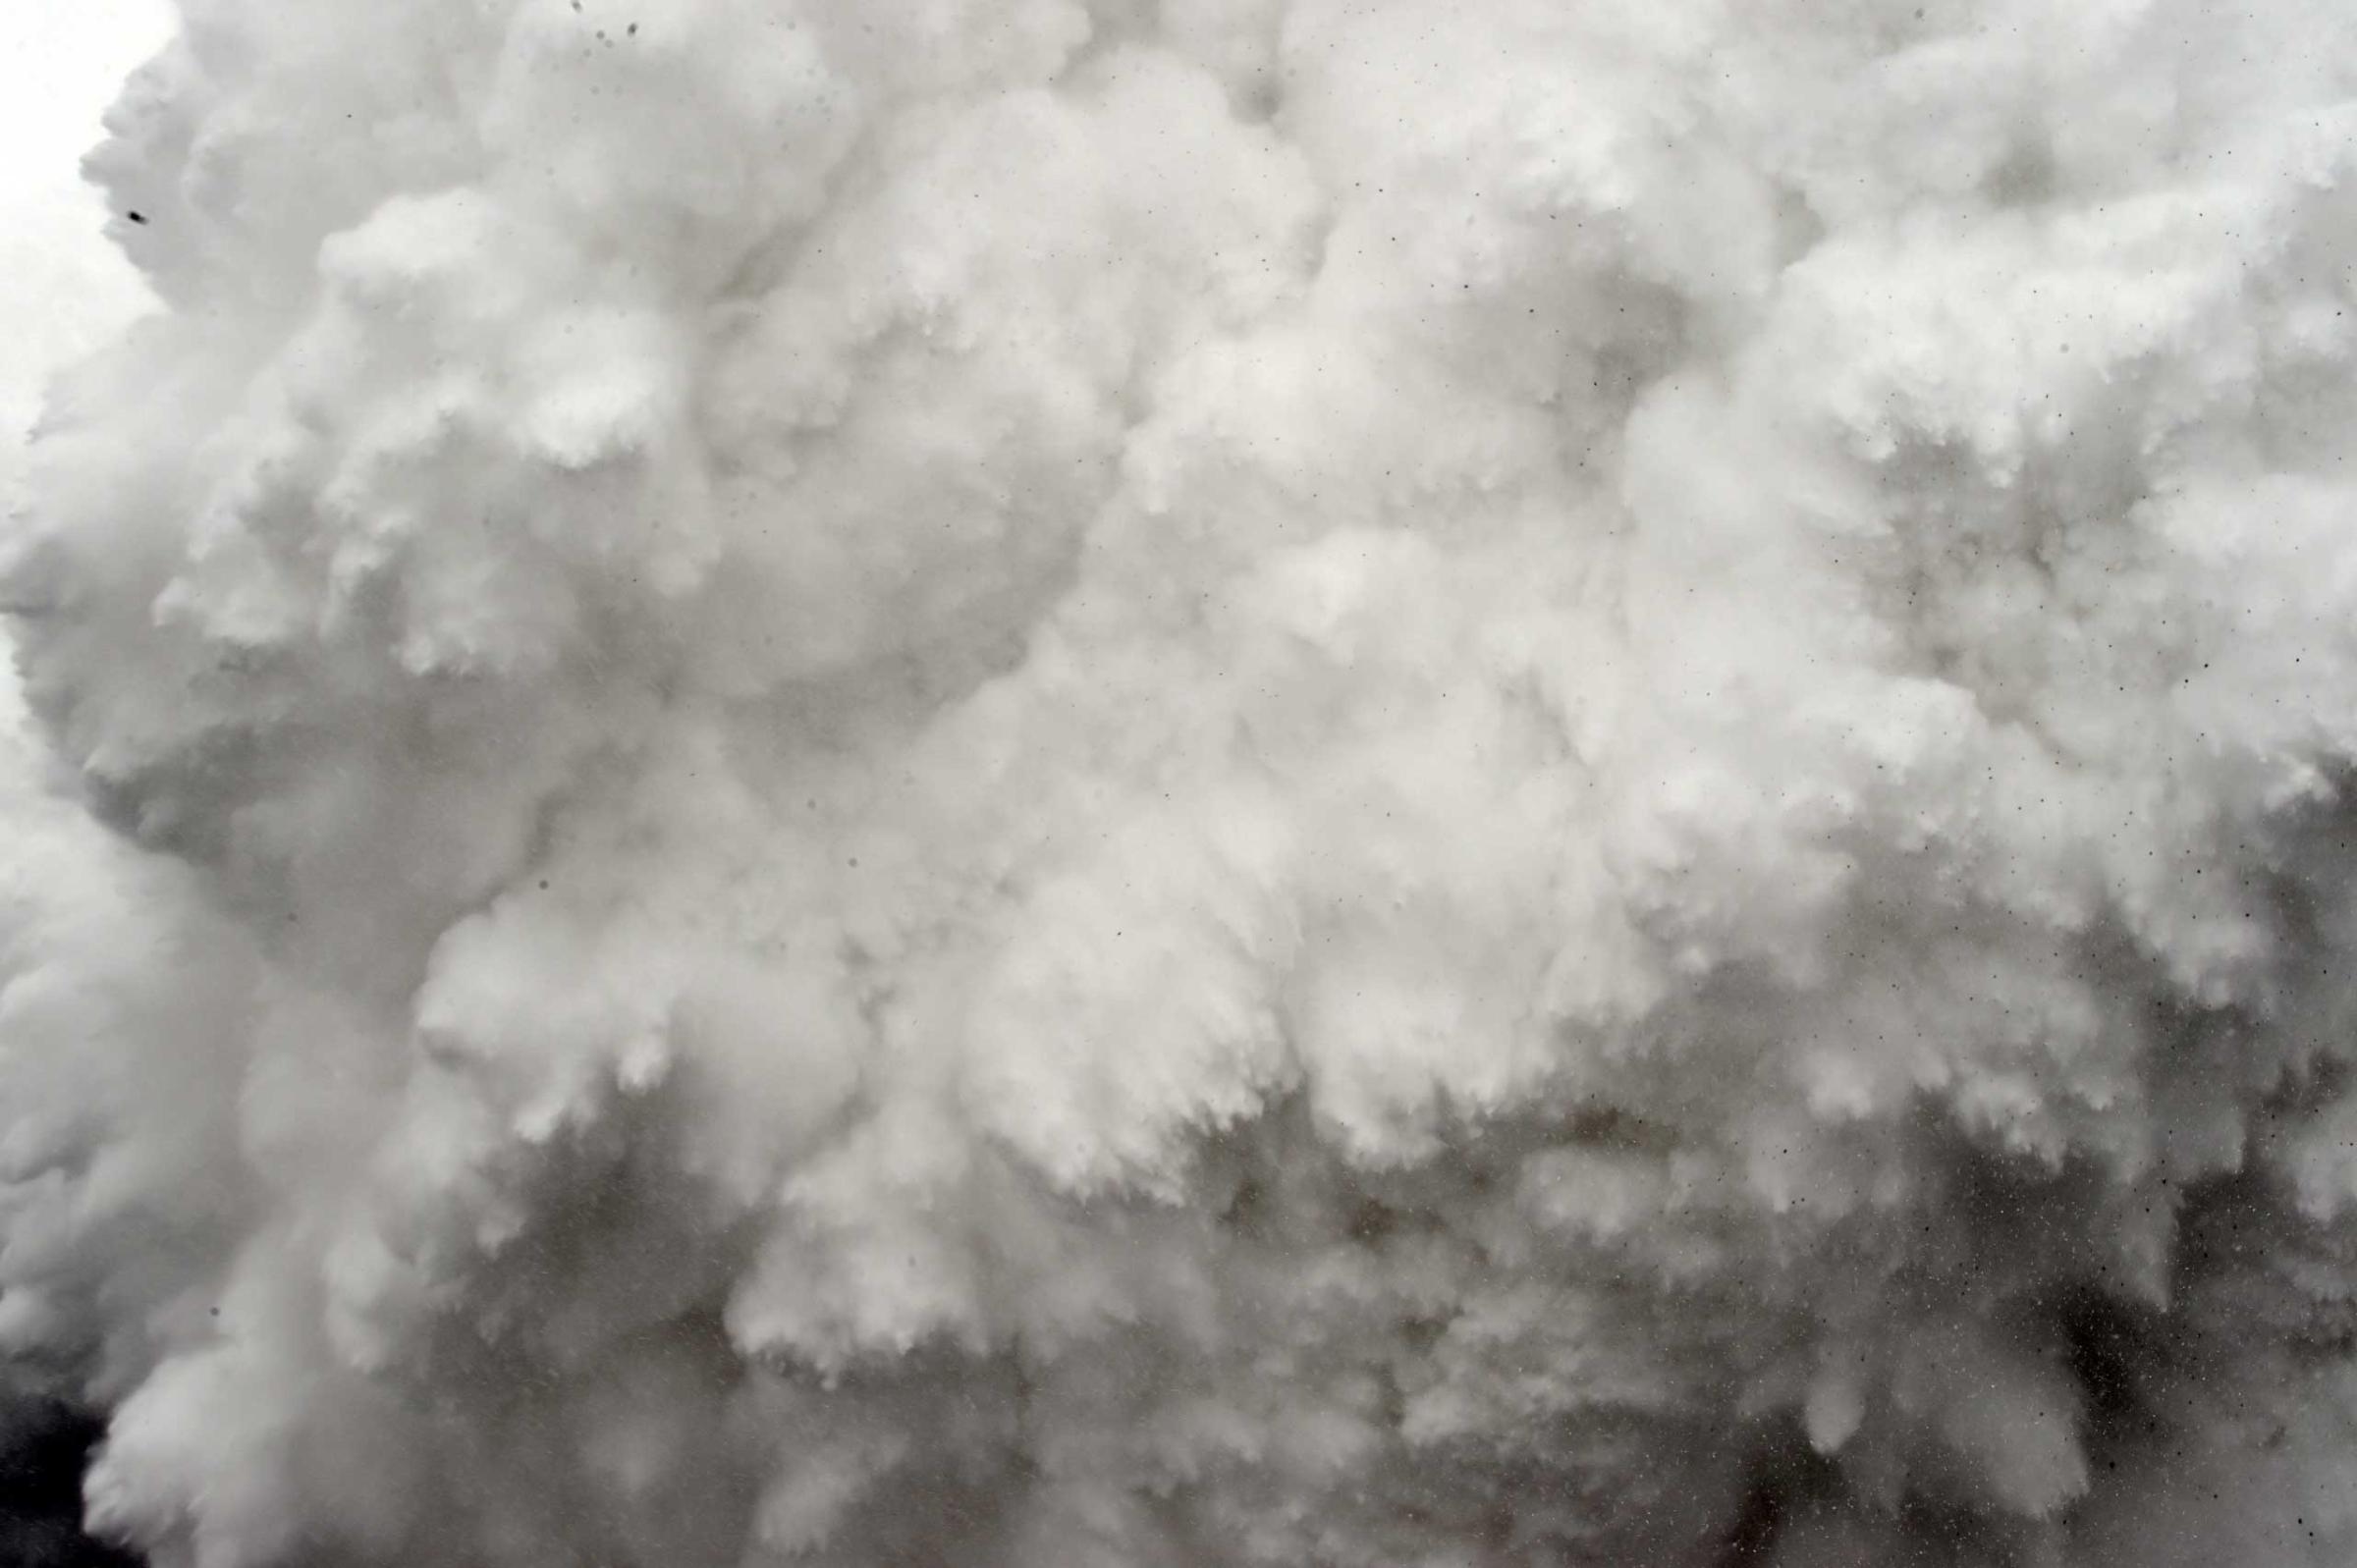 A cloud of snow and debris triggered by an earthquake flies towards Everest Base Camp, moments before parts of the camp were flattened, in the Himalayas, Nepal, on April 25, 2015.